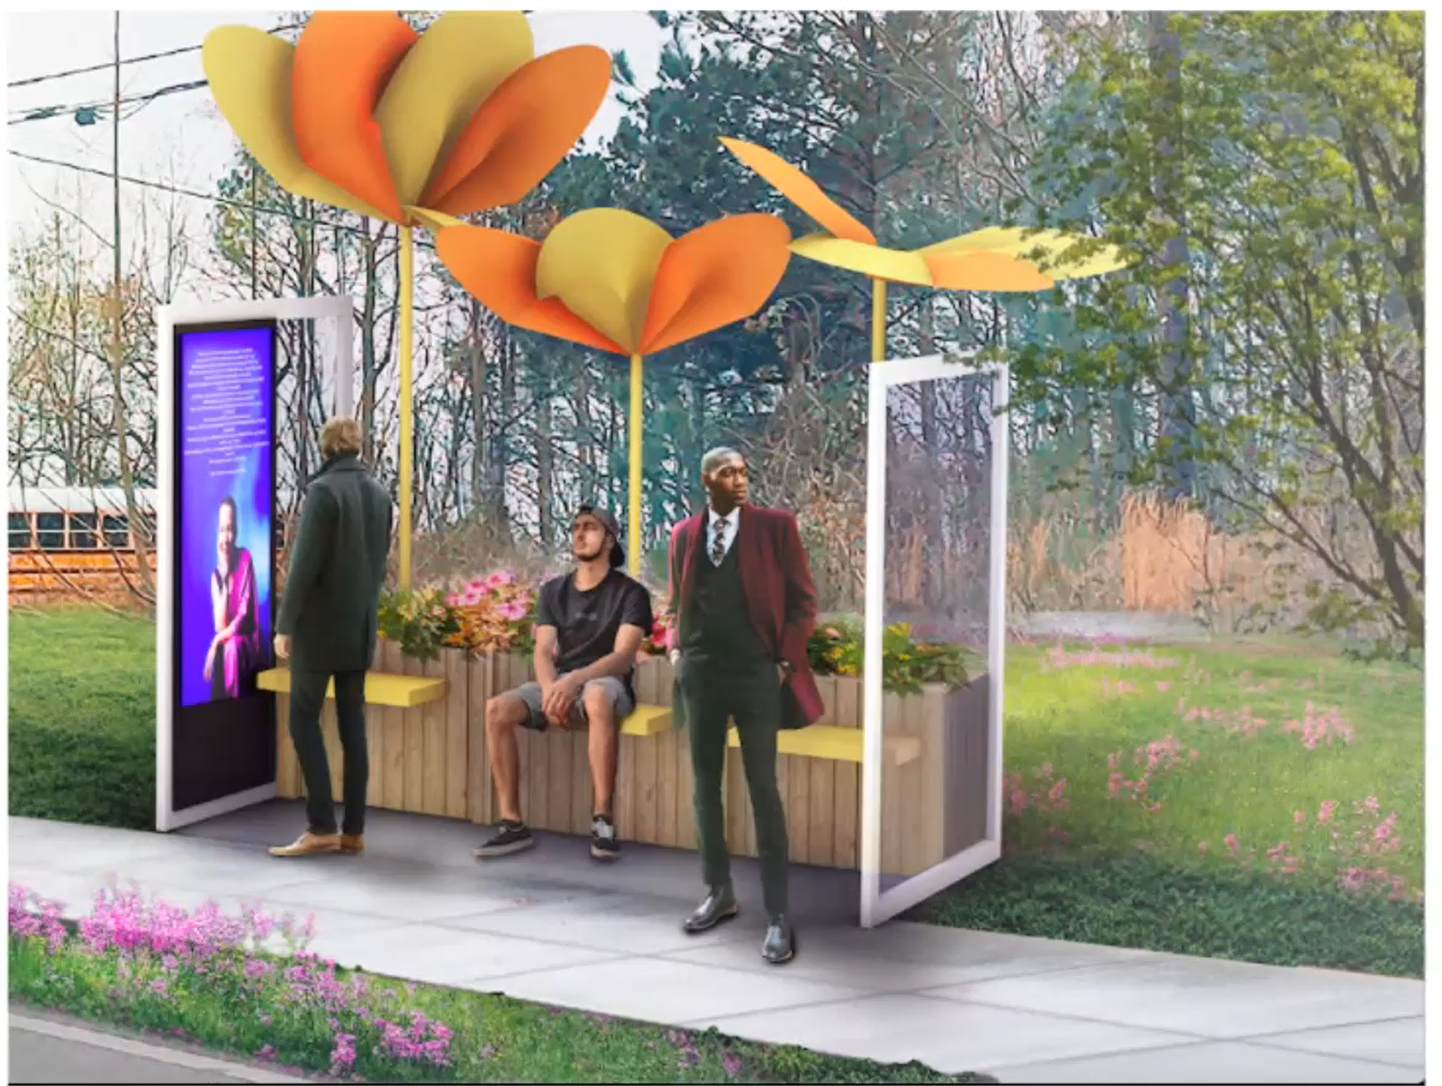 A rendering of an enhanced bus stop presented by an ALMA team at the Arts & Culture forum